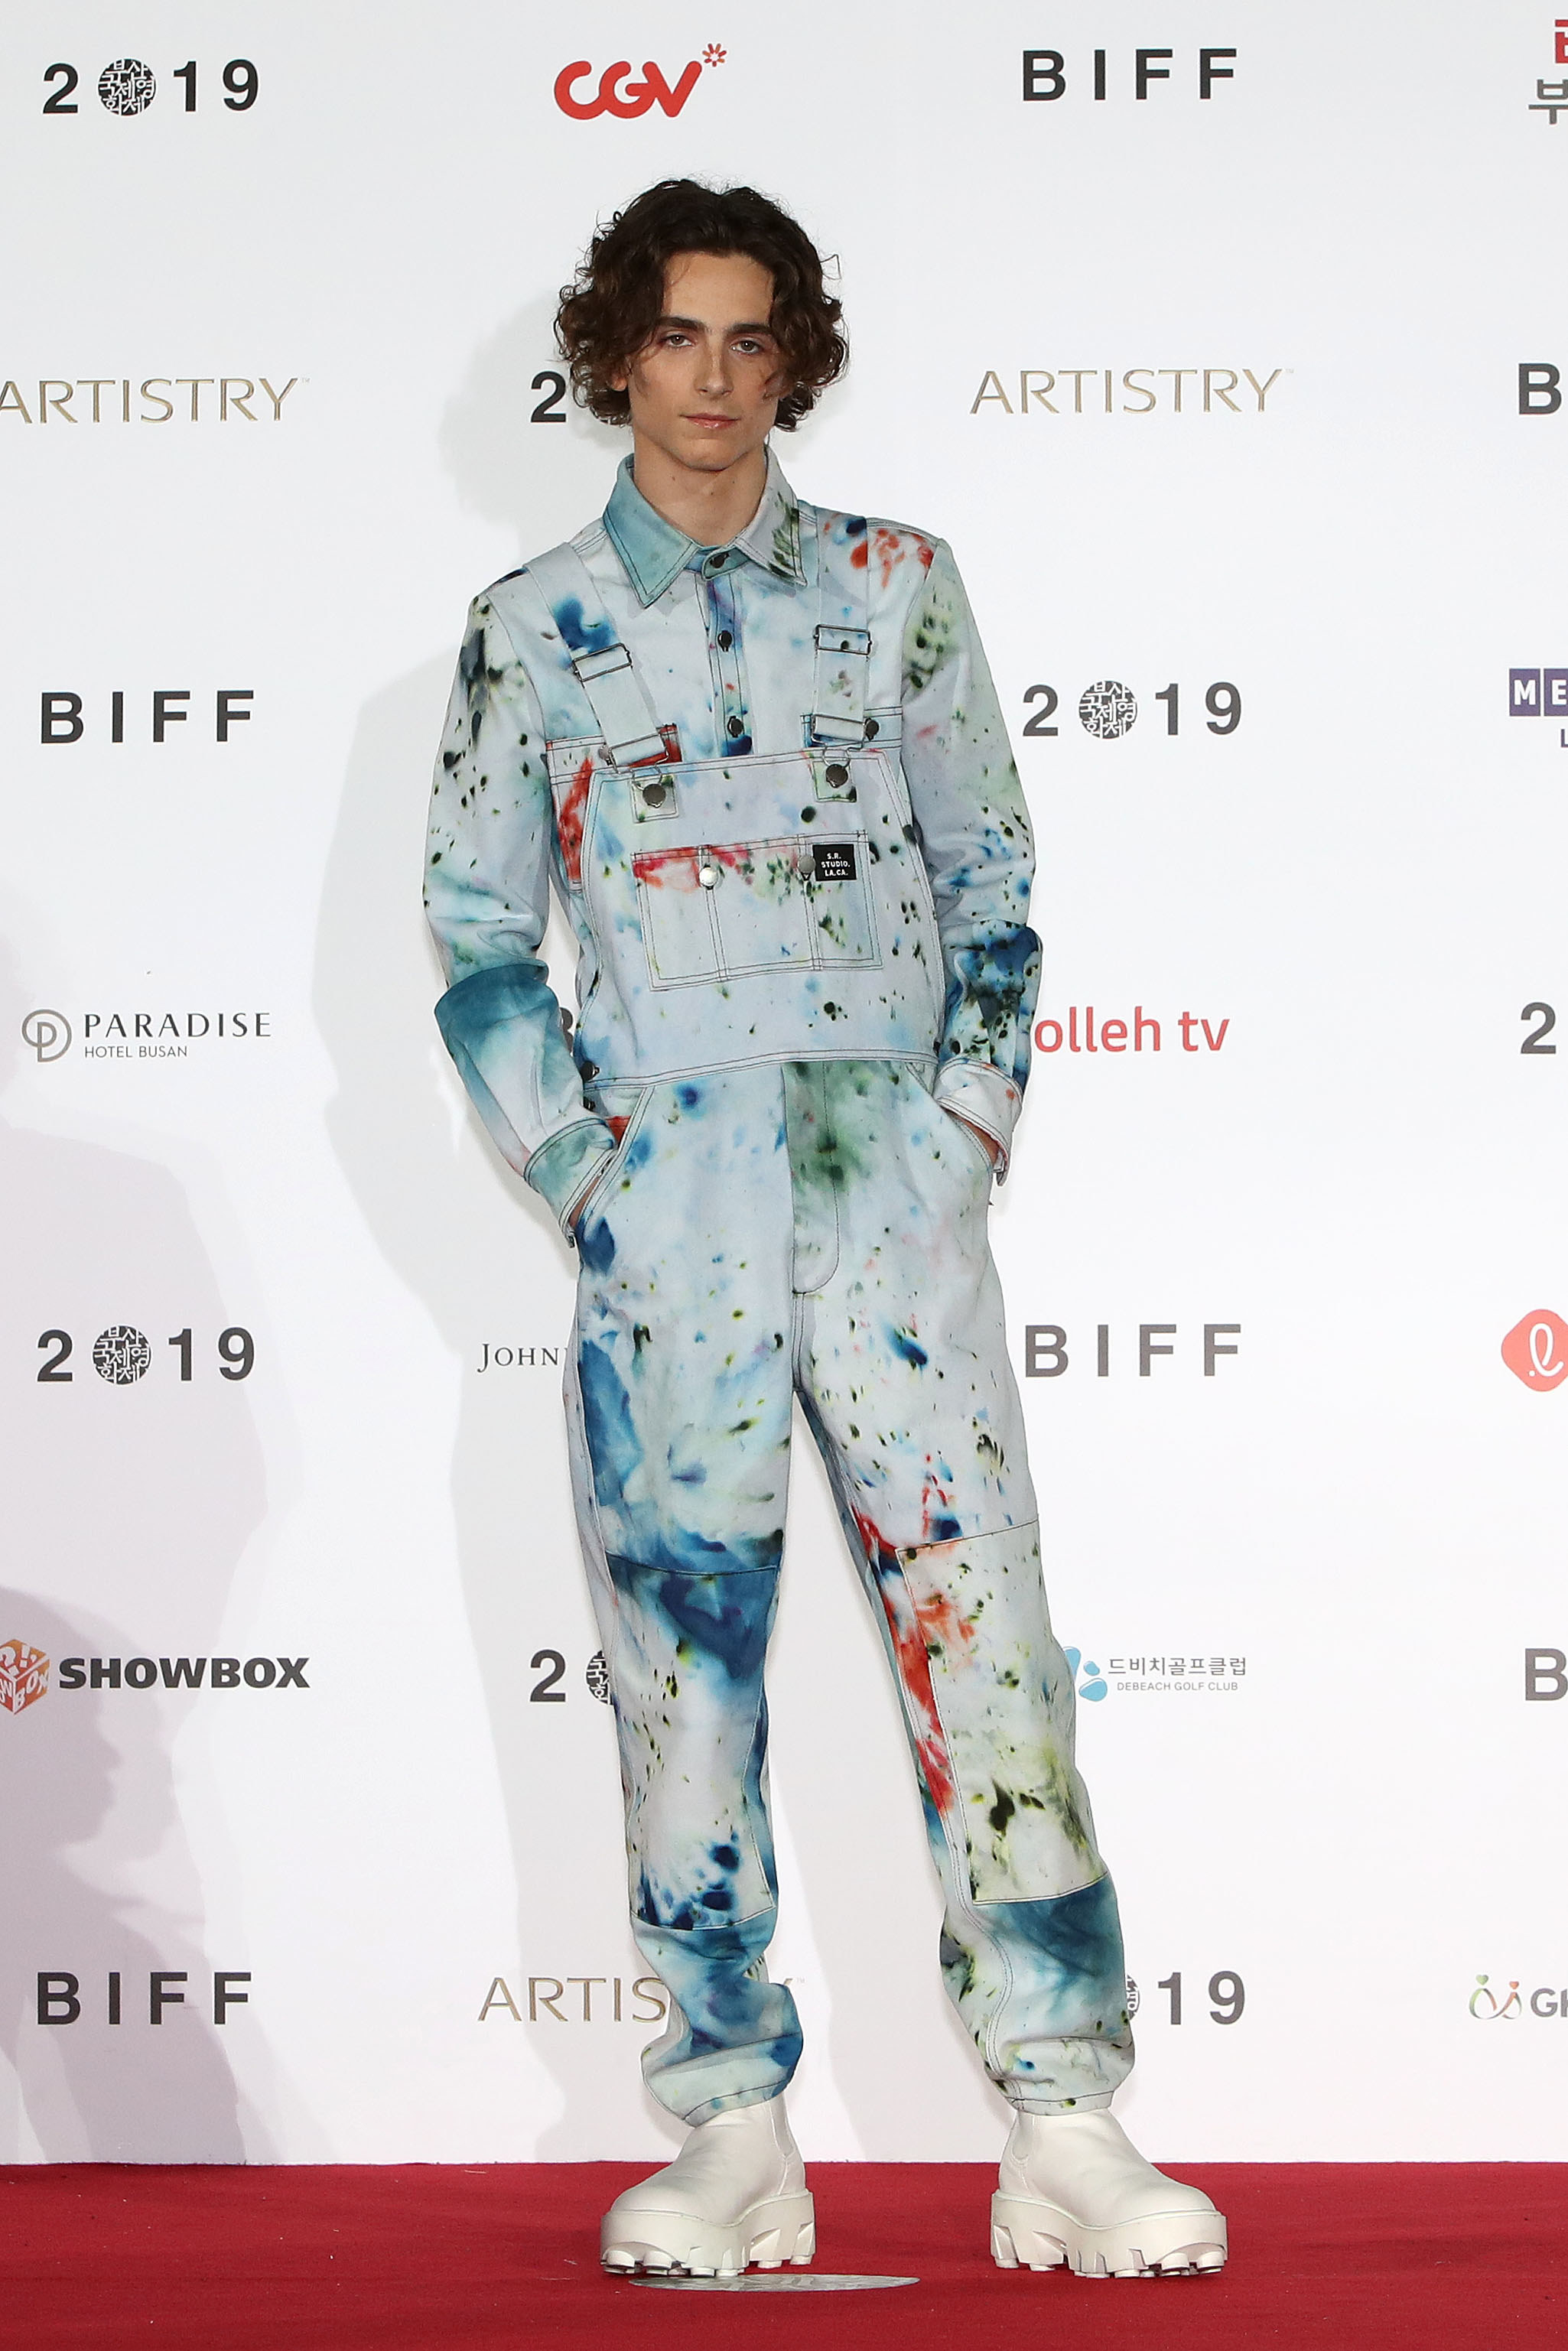 Timothée wears splatter-painted overalls with a matching long sleeve button down